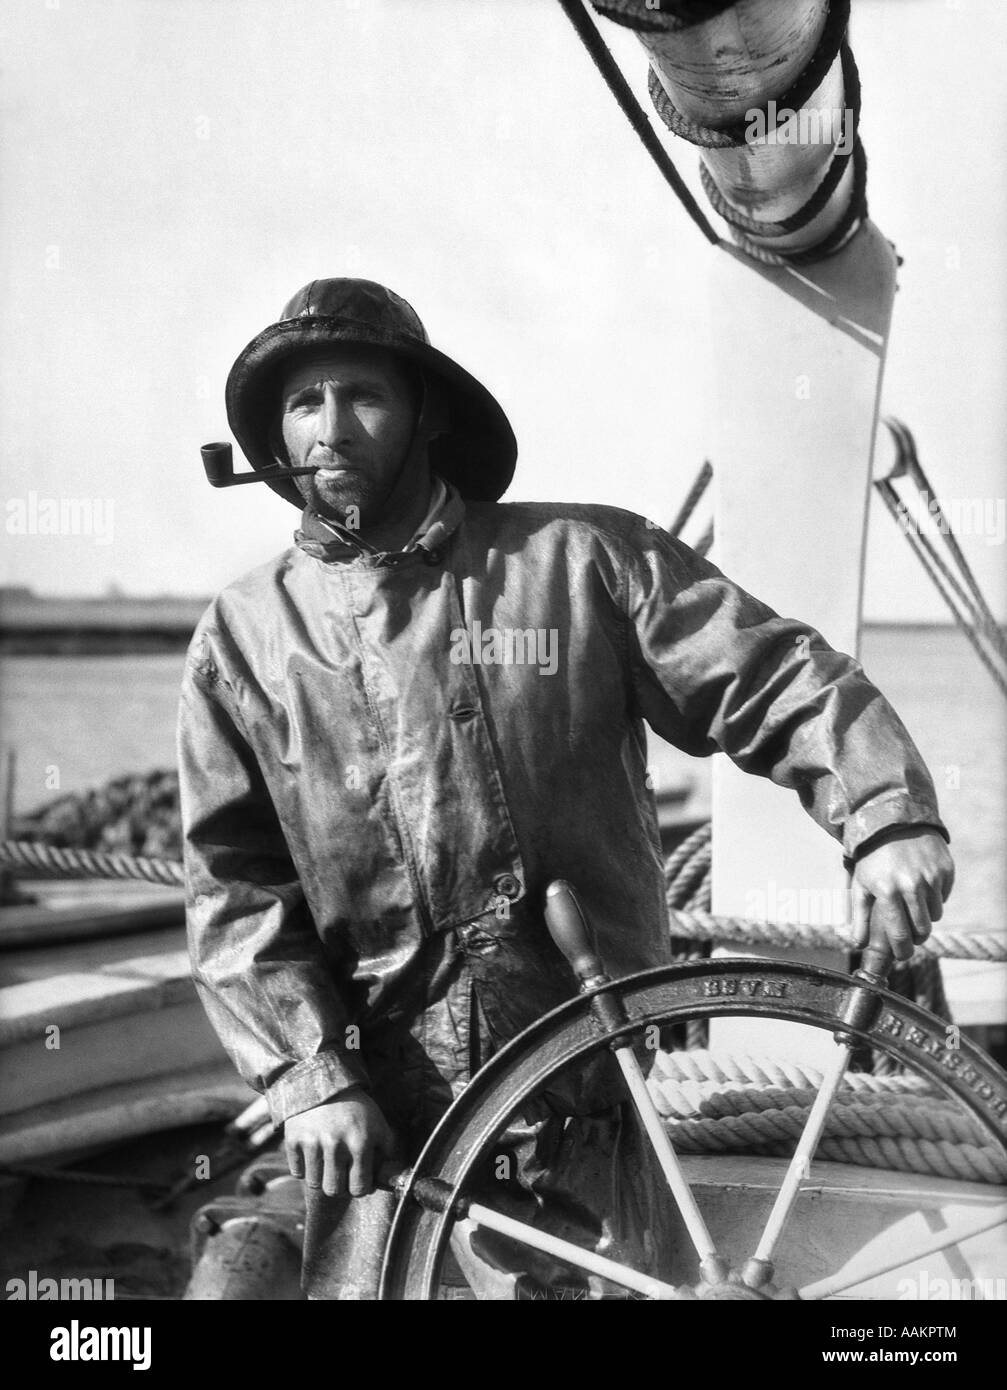 1920s 1930s MAN OLD SALT SAILOR FISHERMAN AT THE HELM OF FISHING BOAT WEARING FOUL WEATHER GEAR AND SMOKING A PIPE Stock Photo